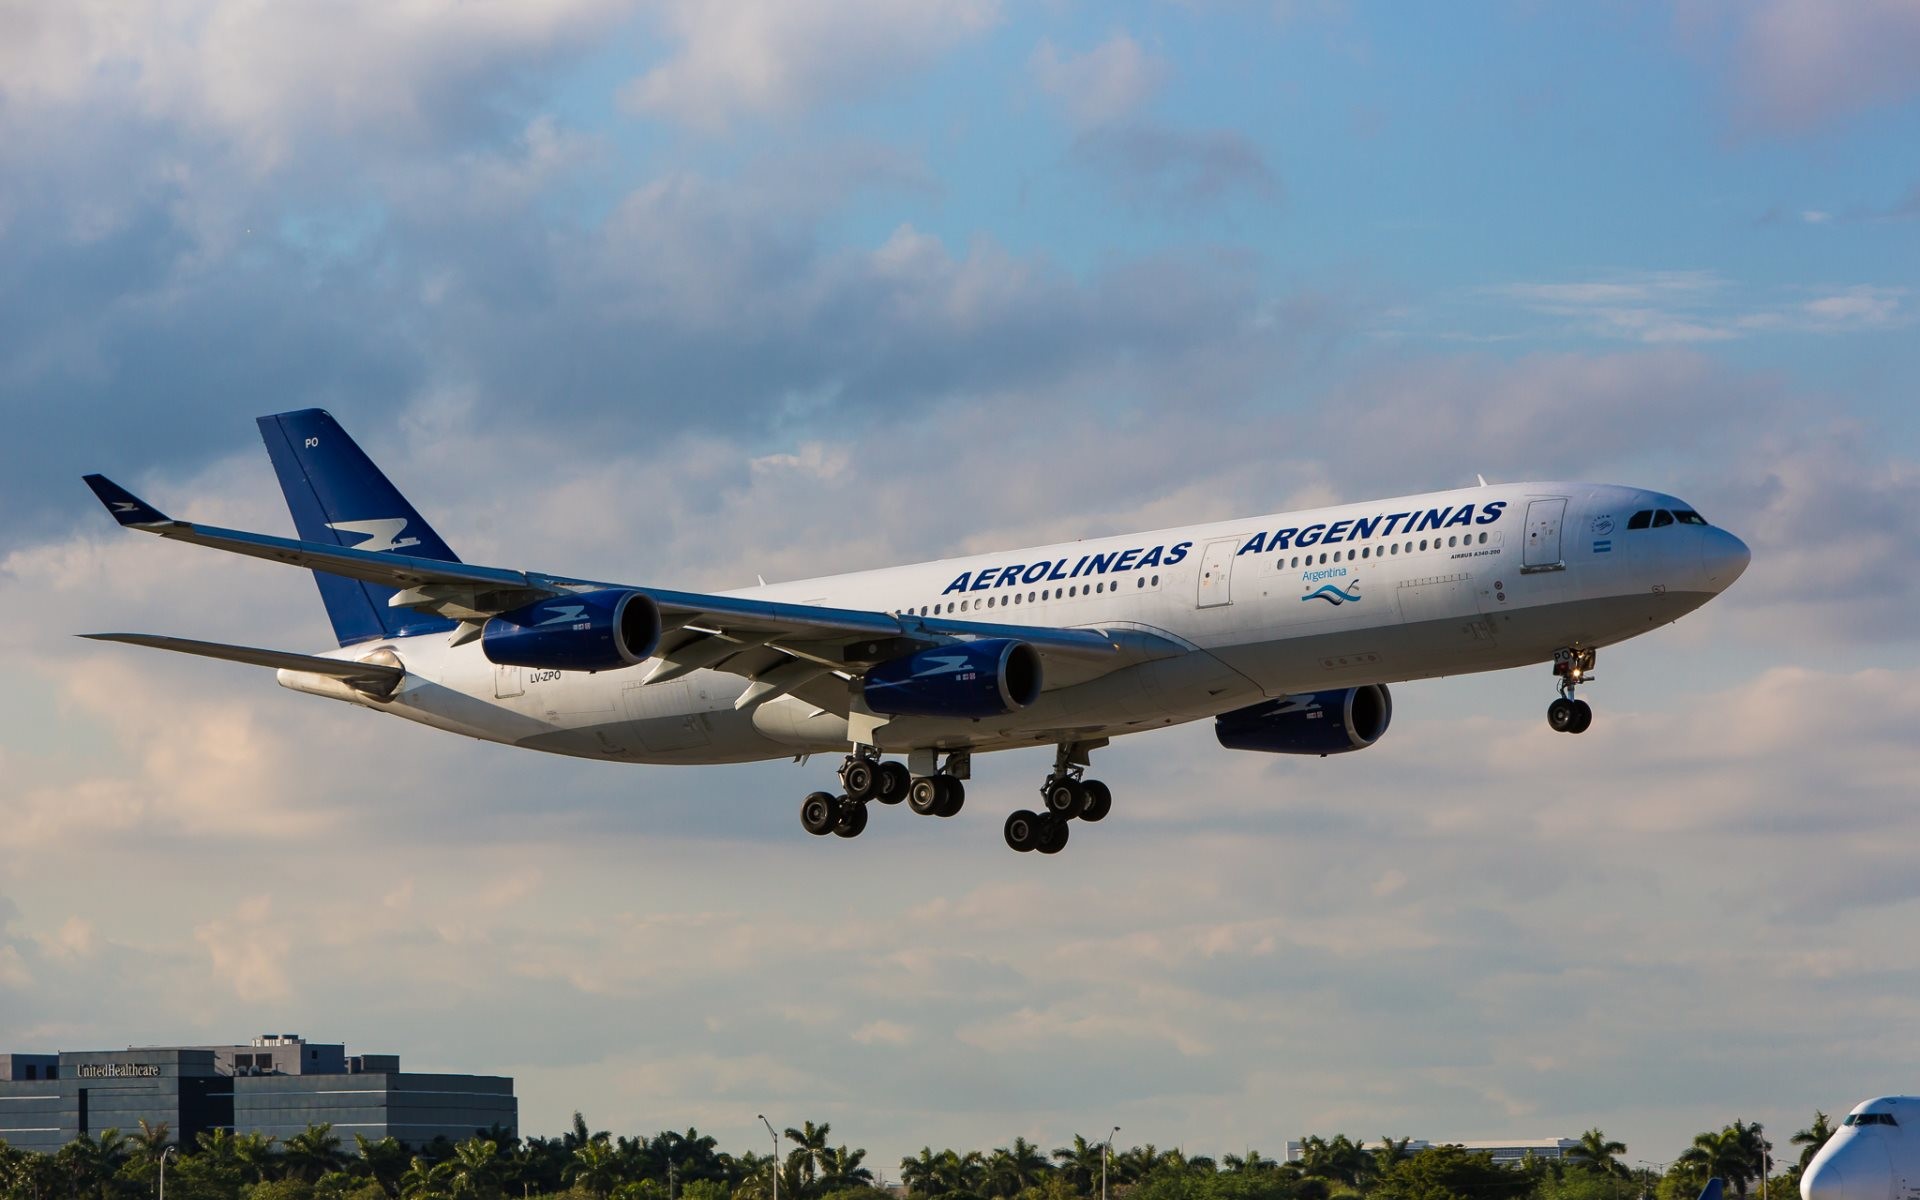 1920x1200 HD Wallpaper: Aerolineas Argentinas Airbus A340-200 ready to land on Miami  Airport